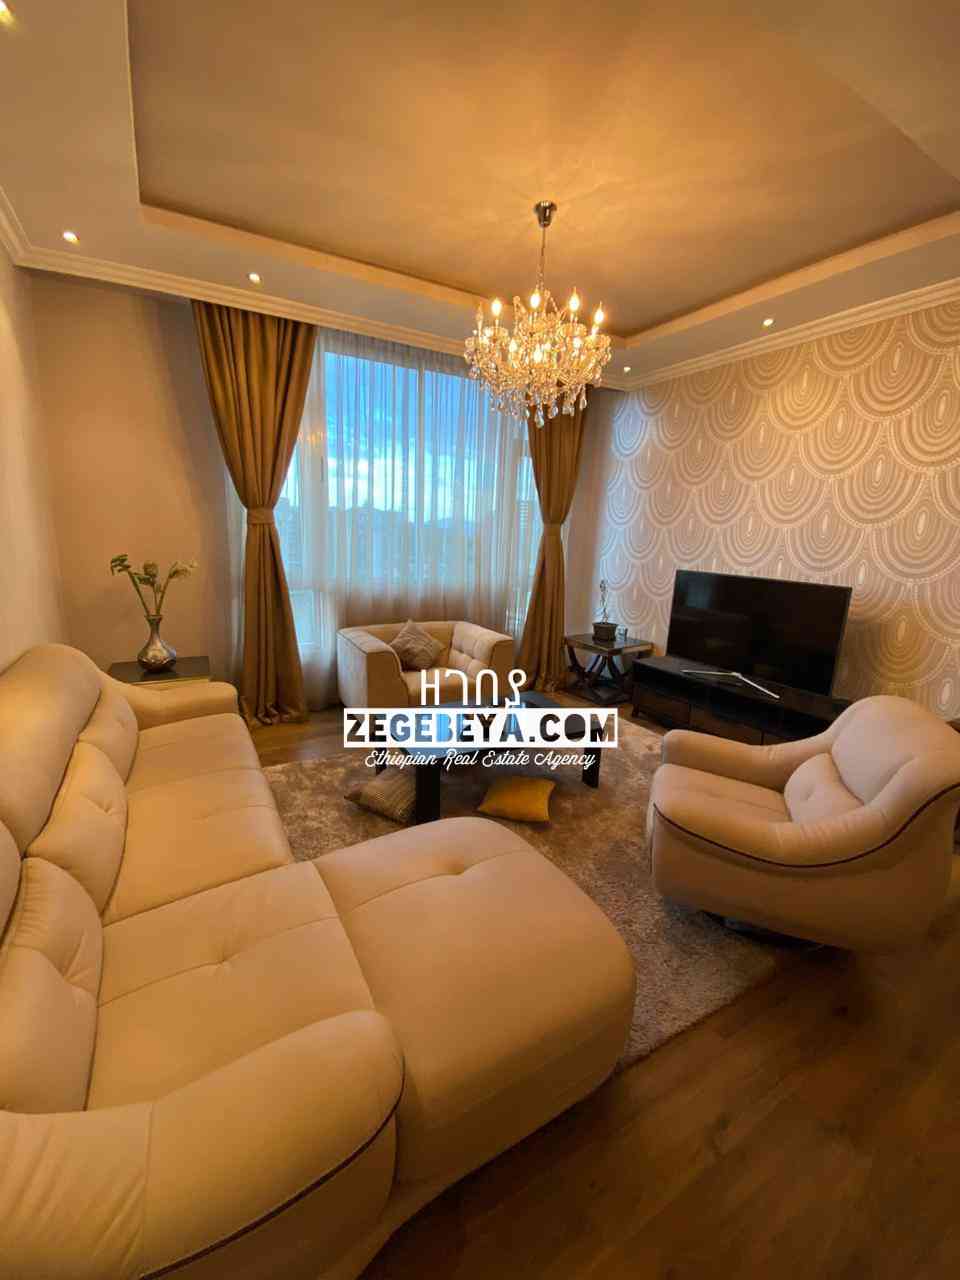 2 Bedroom Furnished Apartment For Rent At Kazanchis :ZG-10511